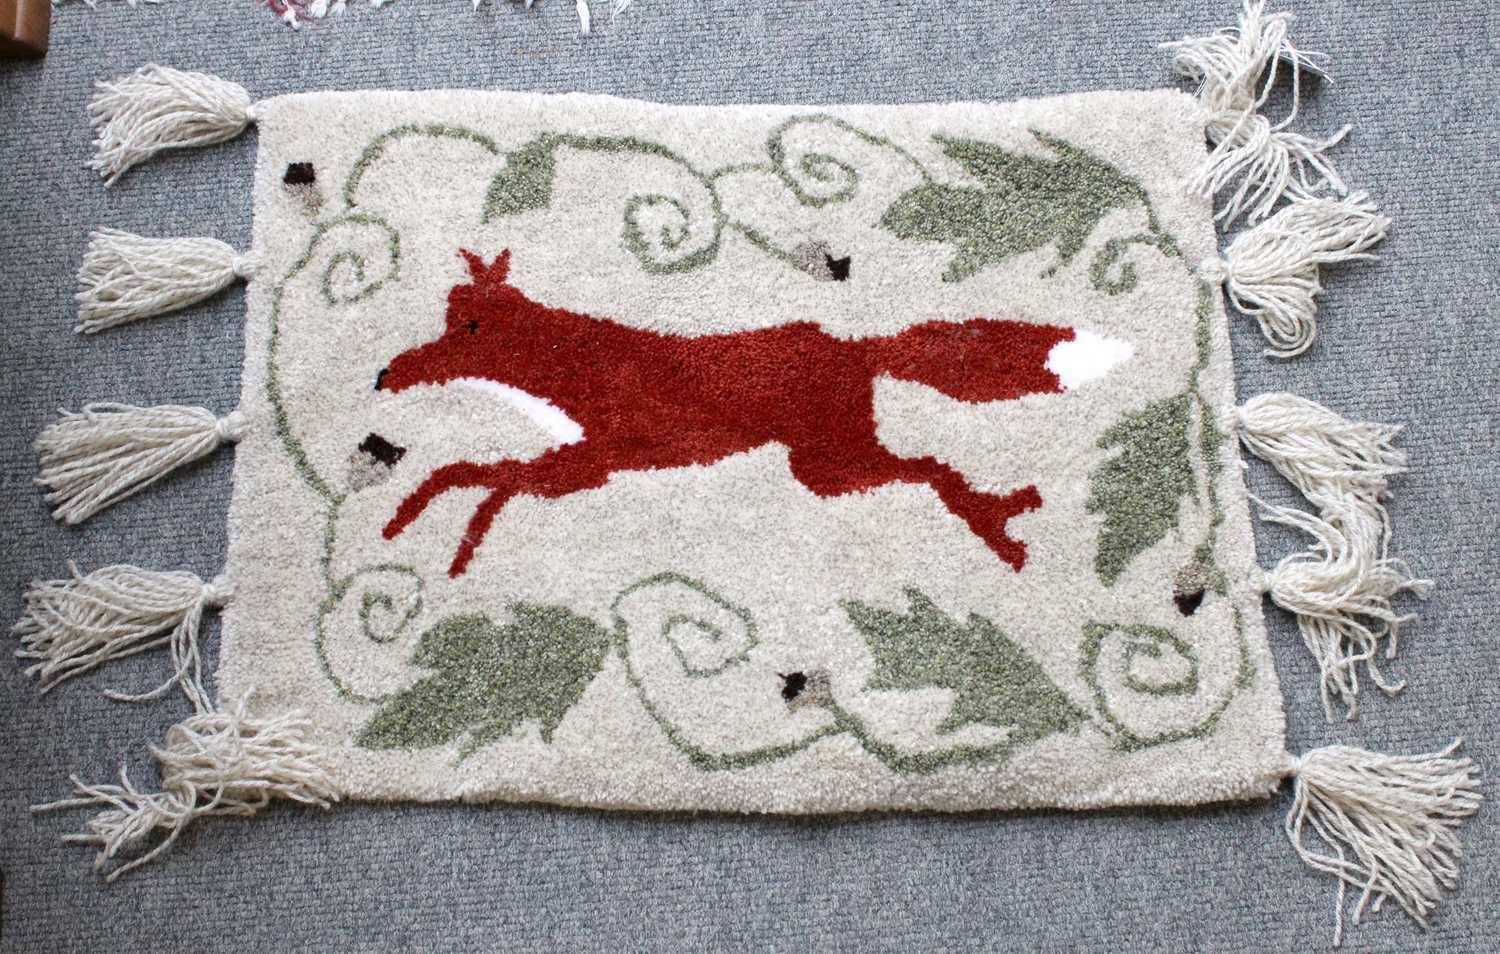 Handmade Jane Dobinson "Bramble & Bumble" Rug, the field depicting a fox on an ivory ground enclosed - Image 3 of 3